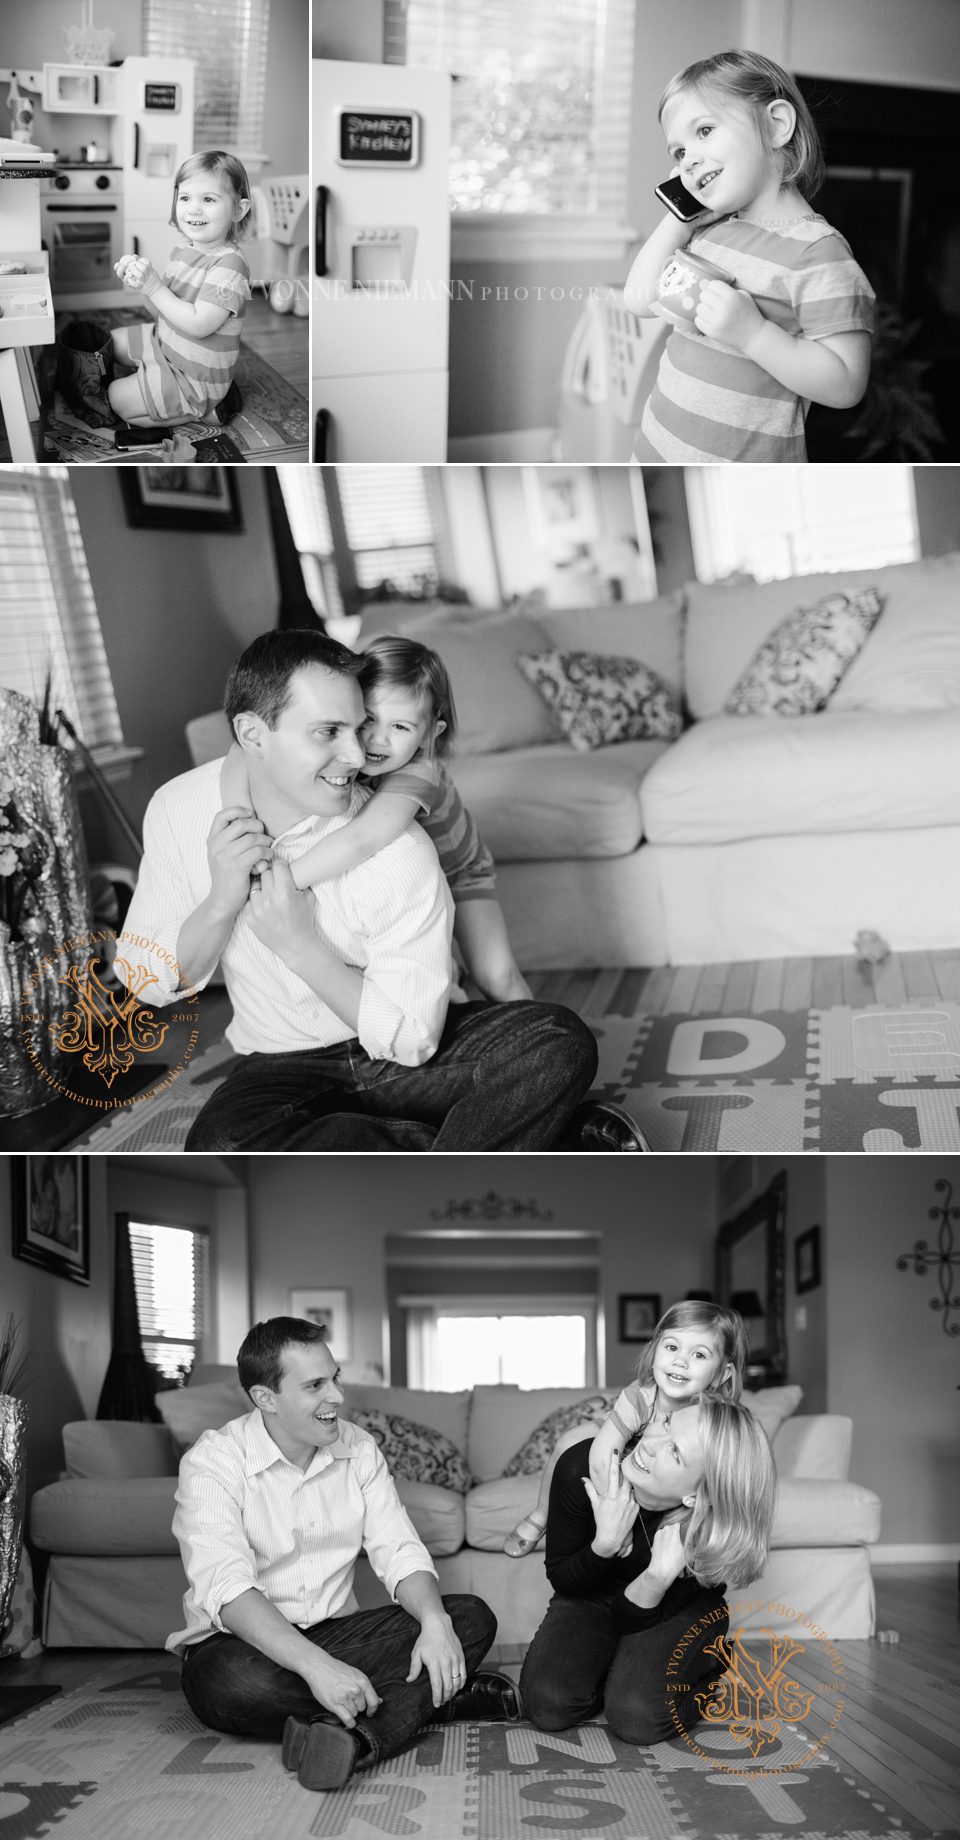 Fun family on-location photos in University City, MO by Yvonne Niemann Photography.